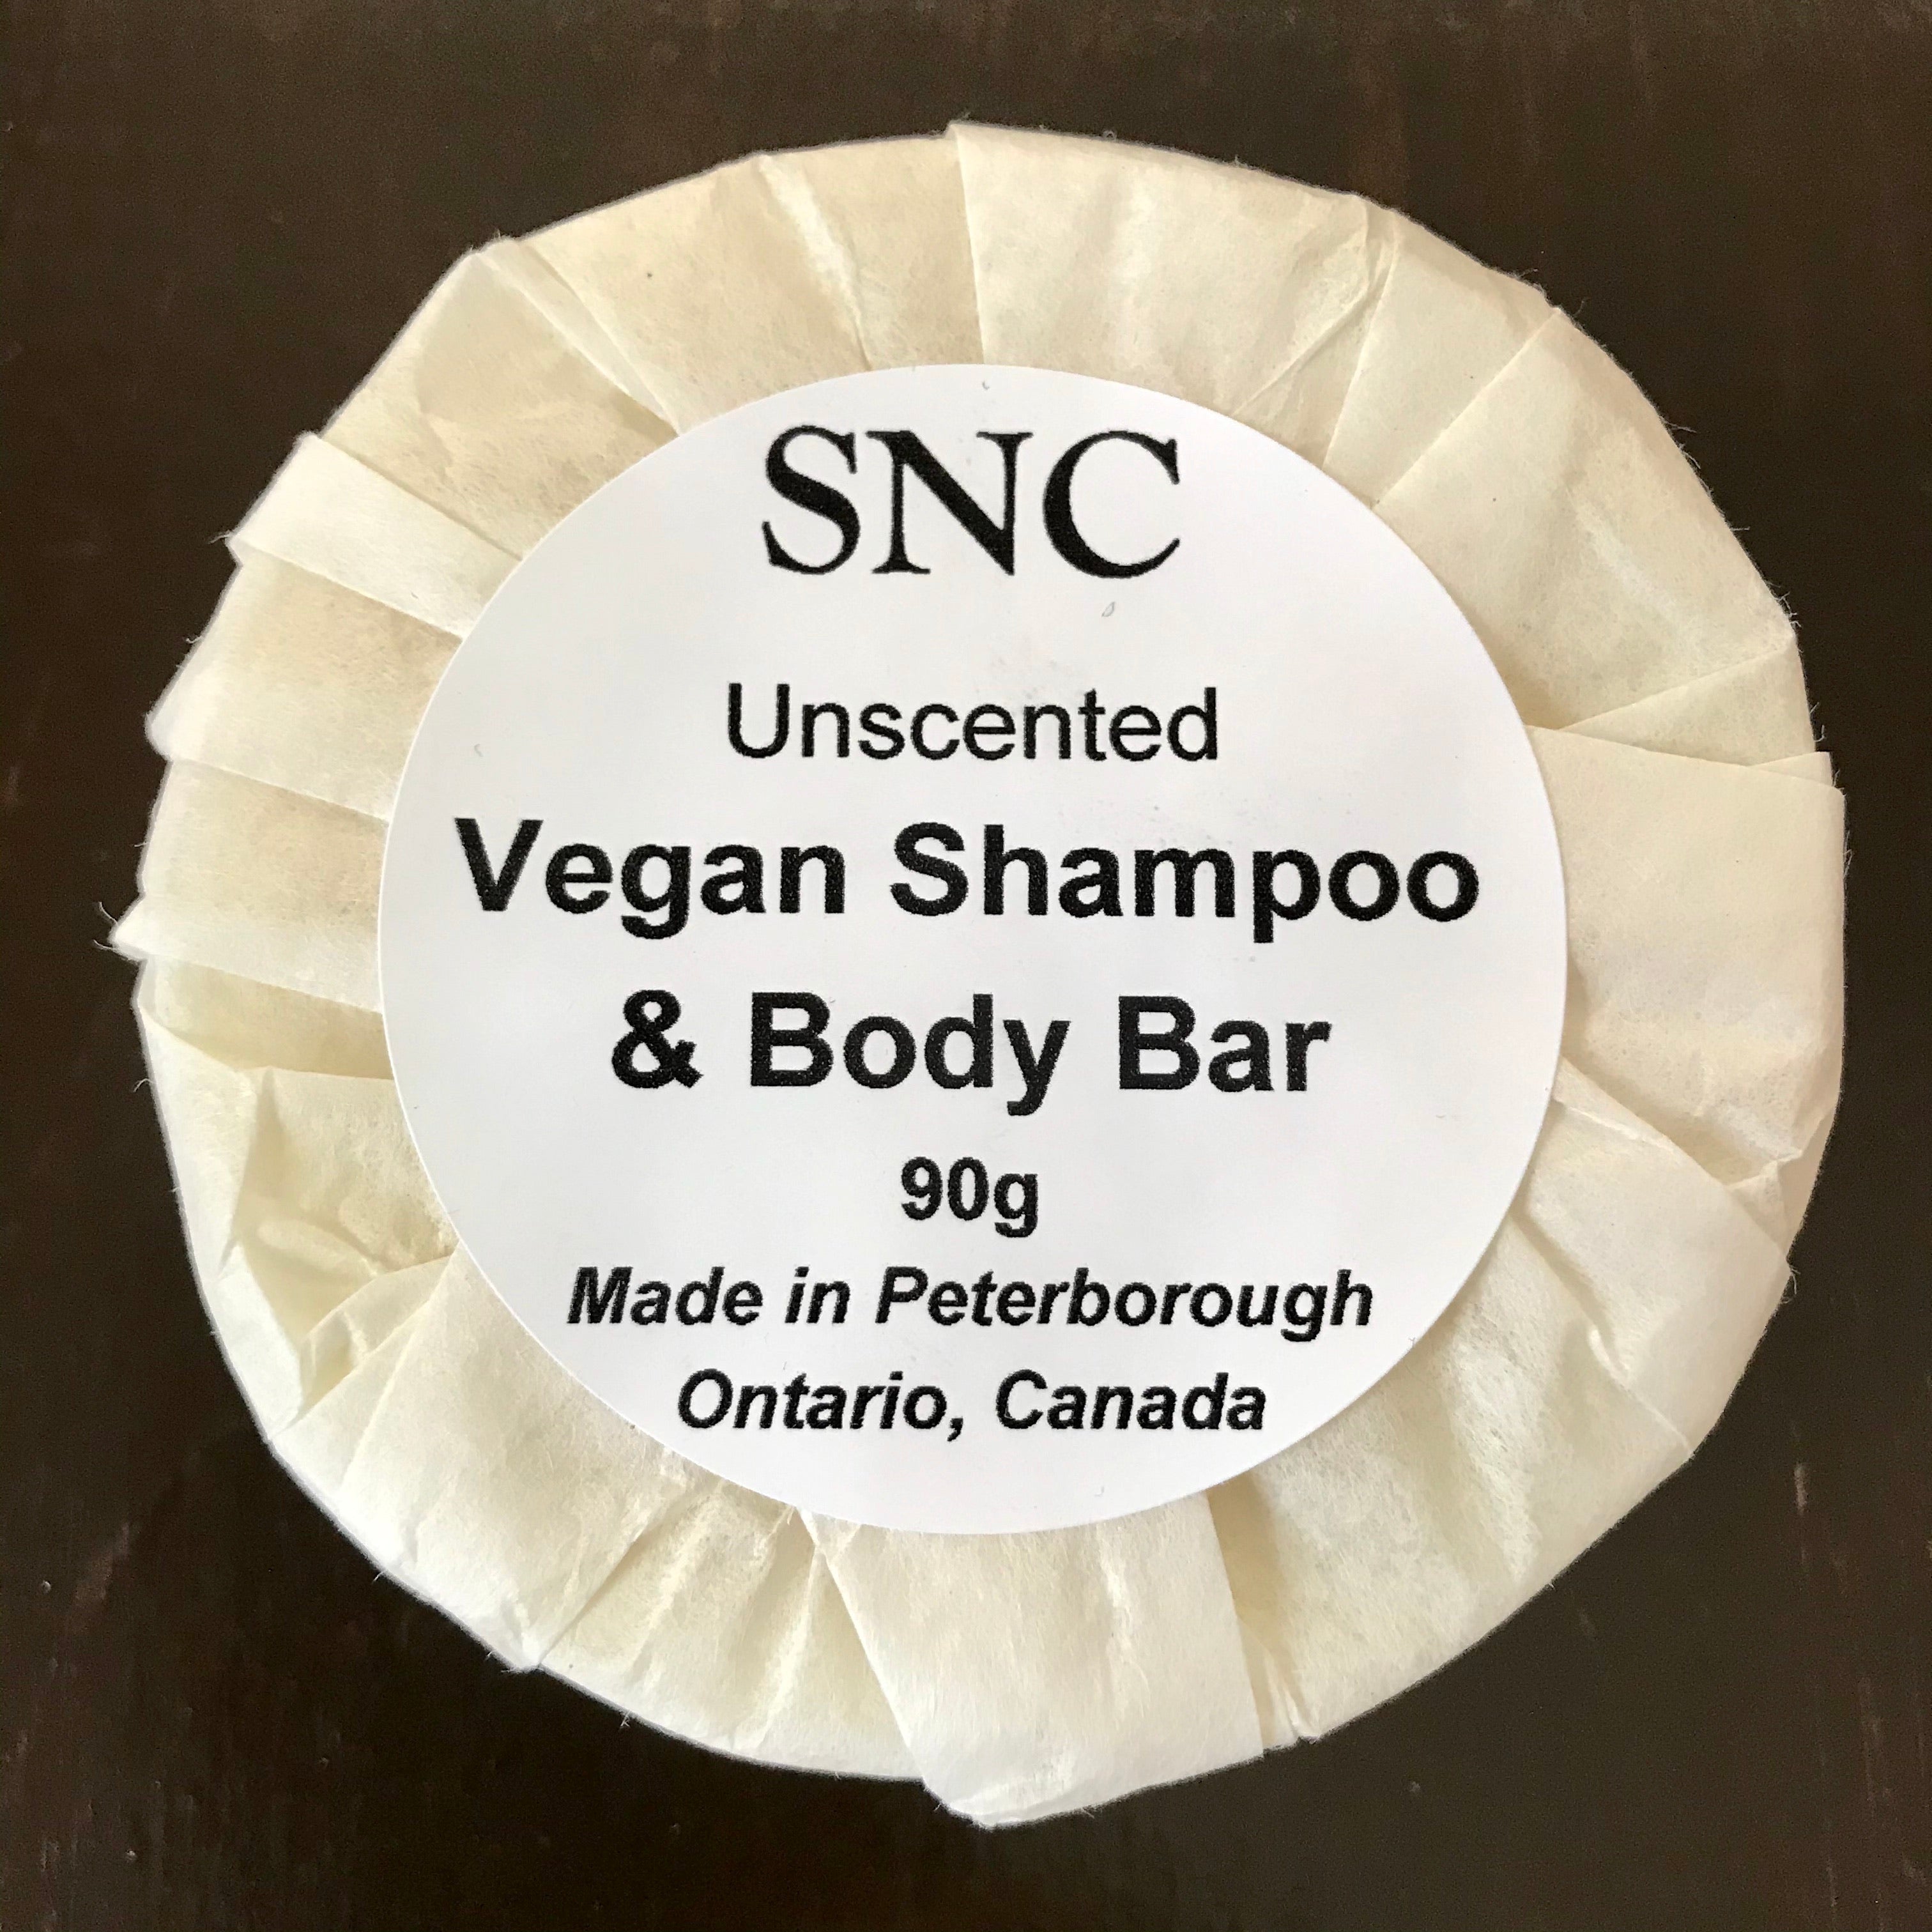 unscented vegan shampoo and body soap made in canada